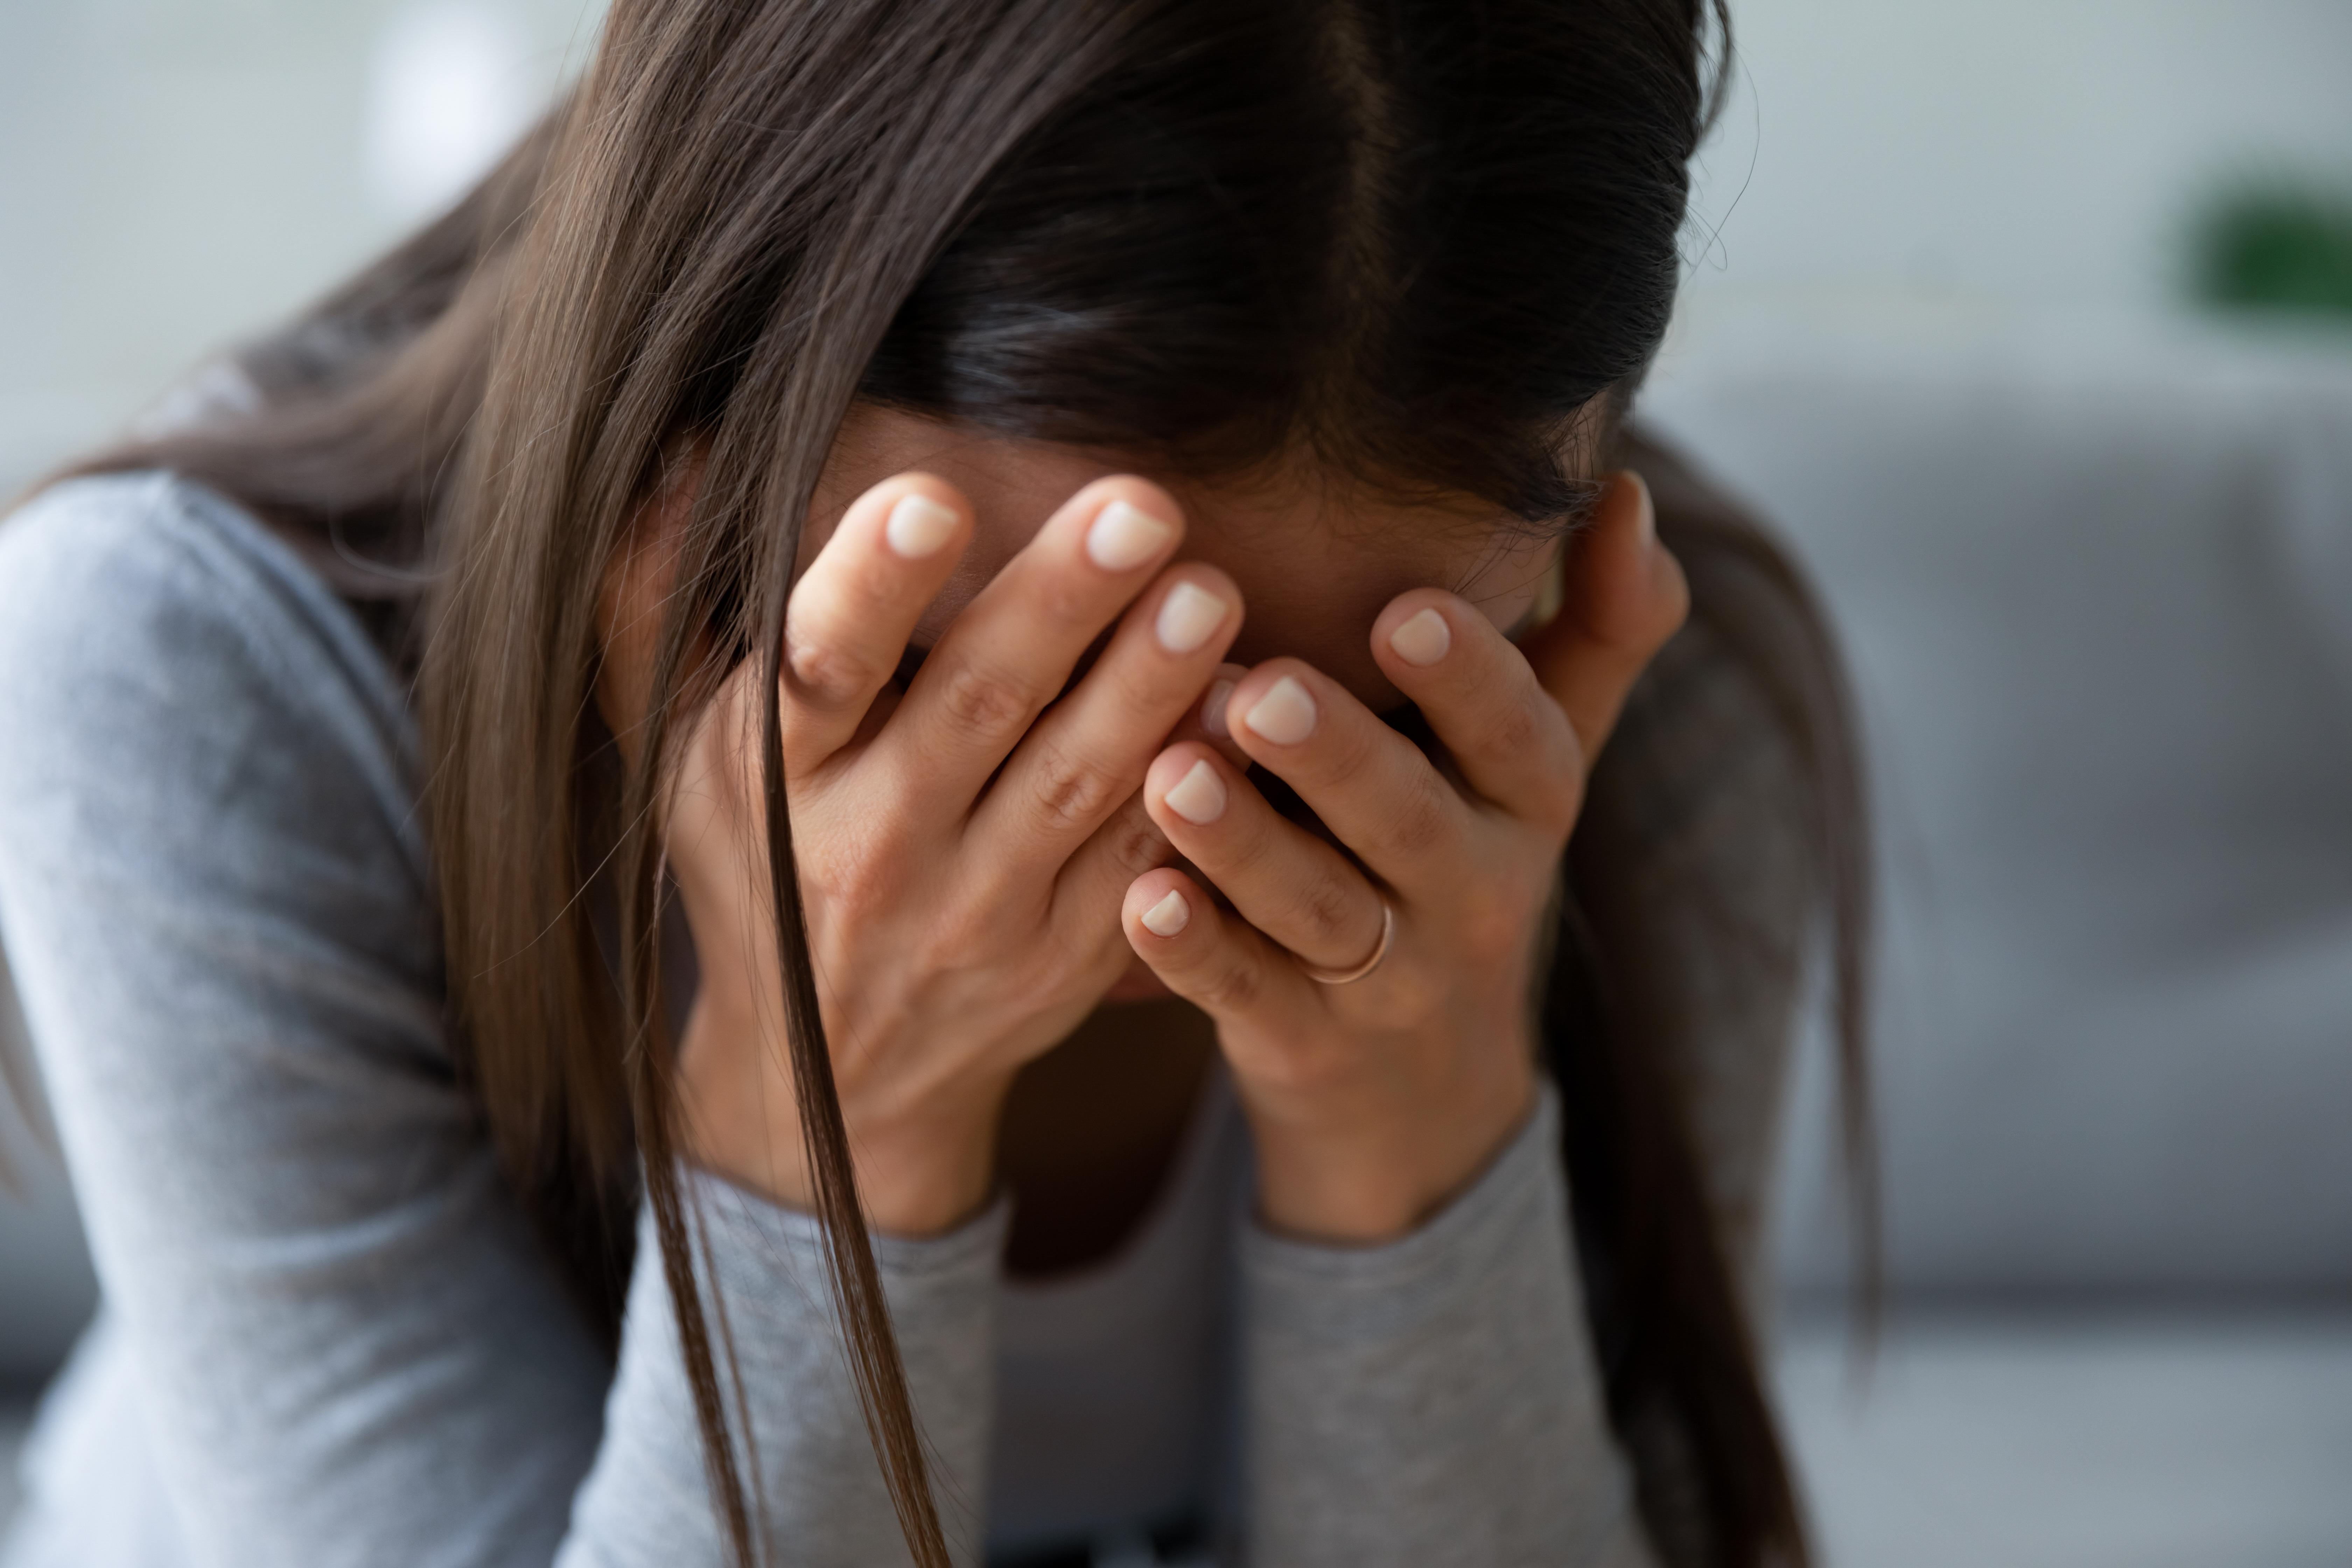 A depressed woman hiding her face with her hands | Source: Shutterstock